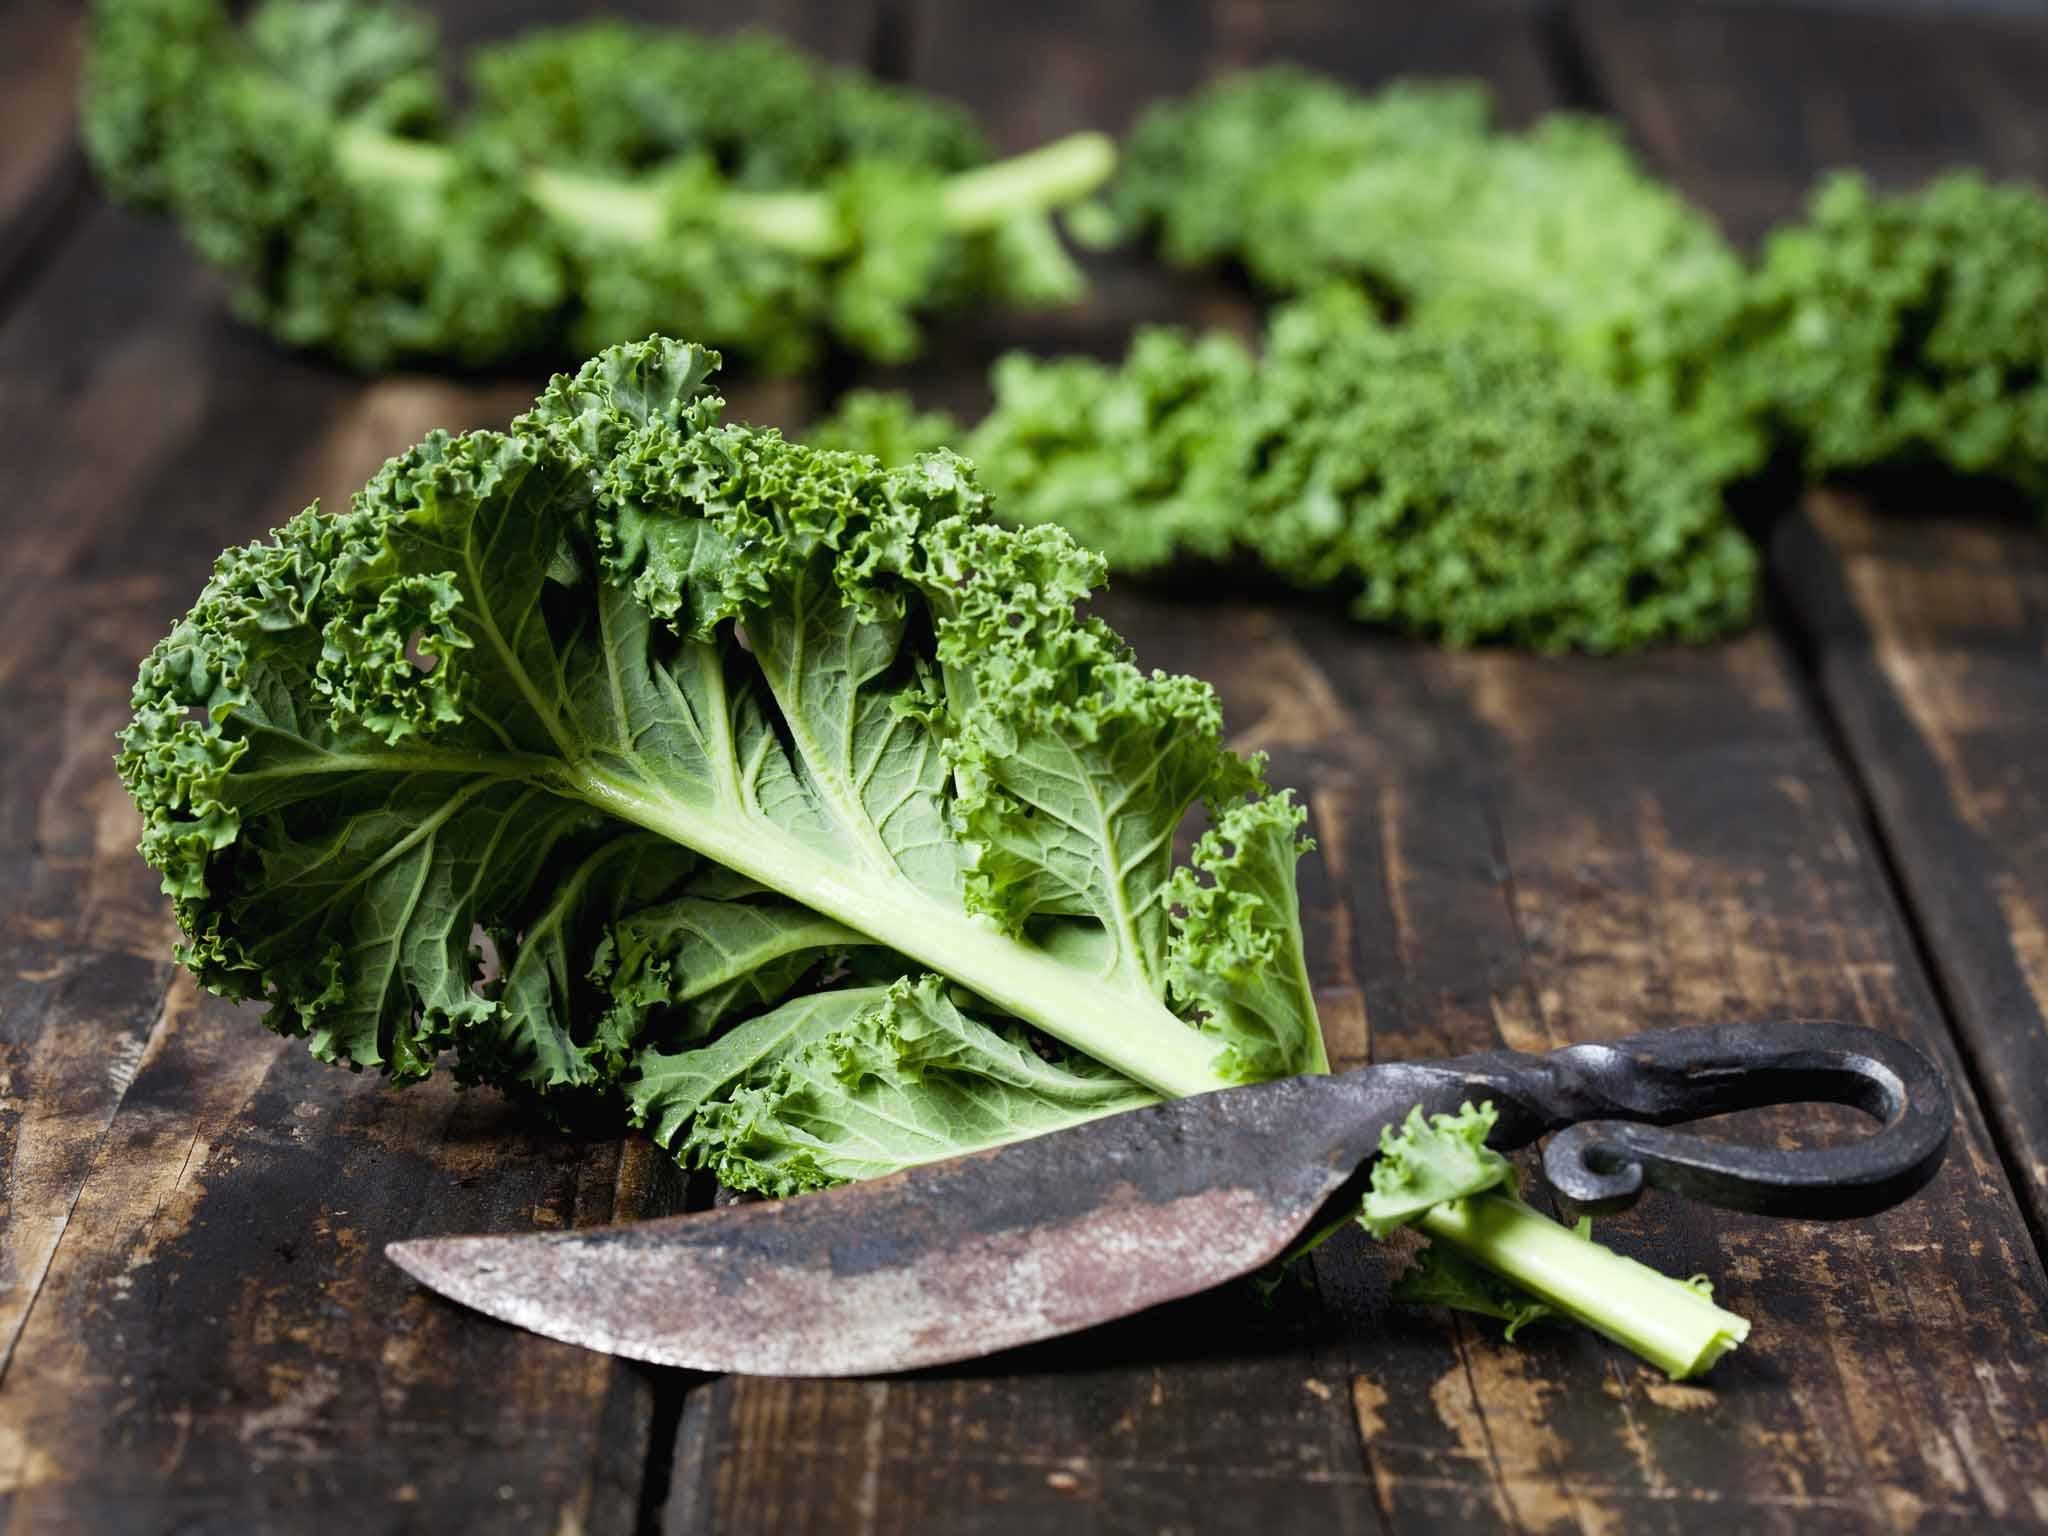 Leafy greens are great for tacking under-eye bags